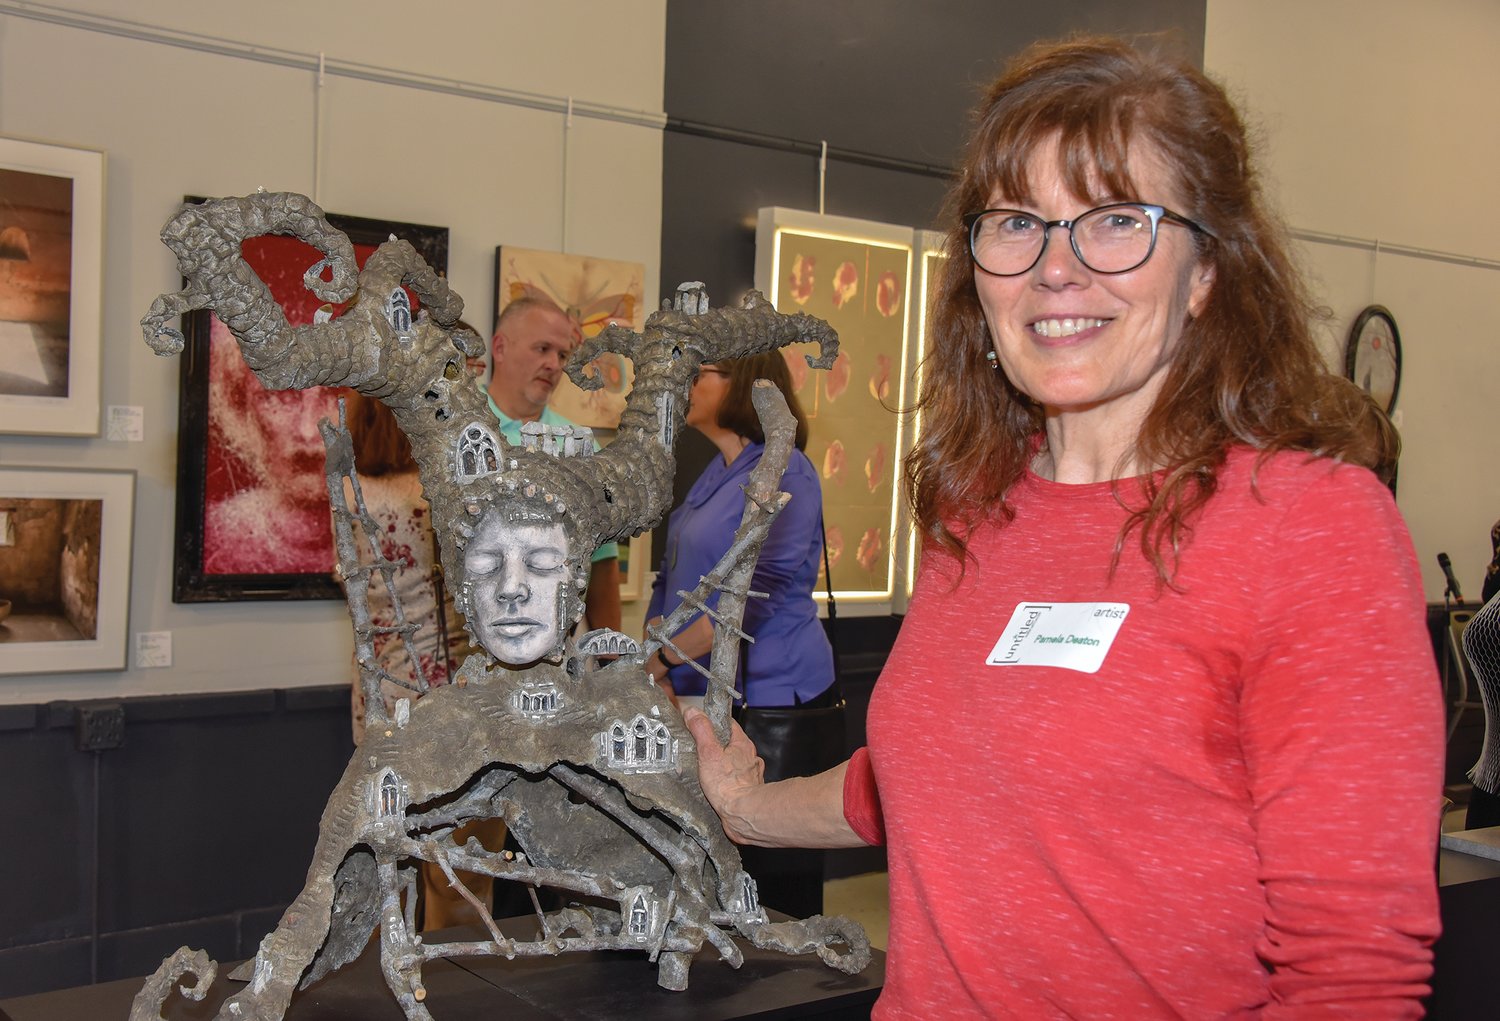 Pamela L. Deaton, a regionally renowned artist, will give a talk at Athens Arts annual meeting on Thursday in the Fusion 54 building in downtown Crawfordsville.